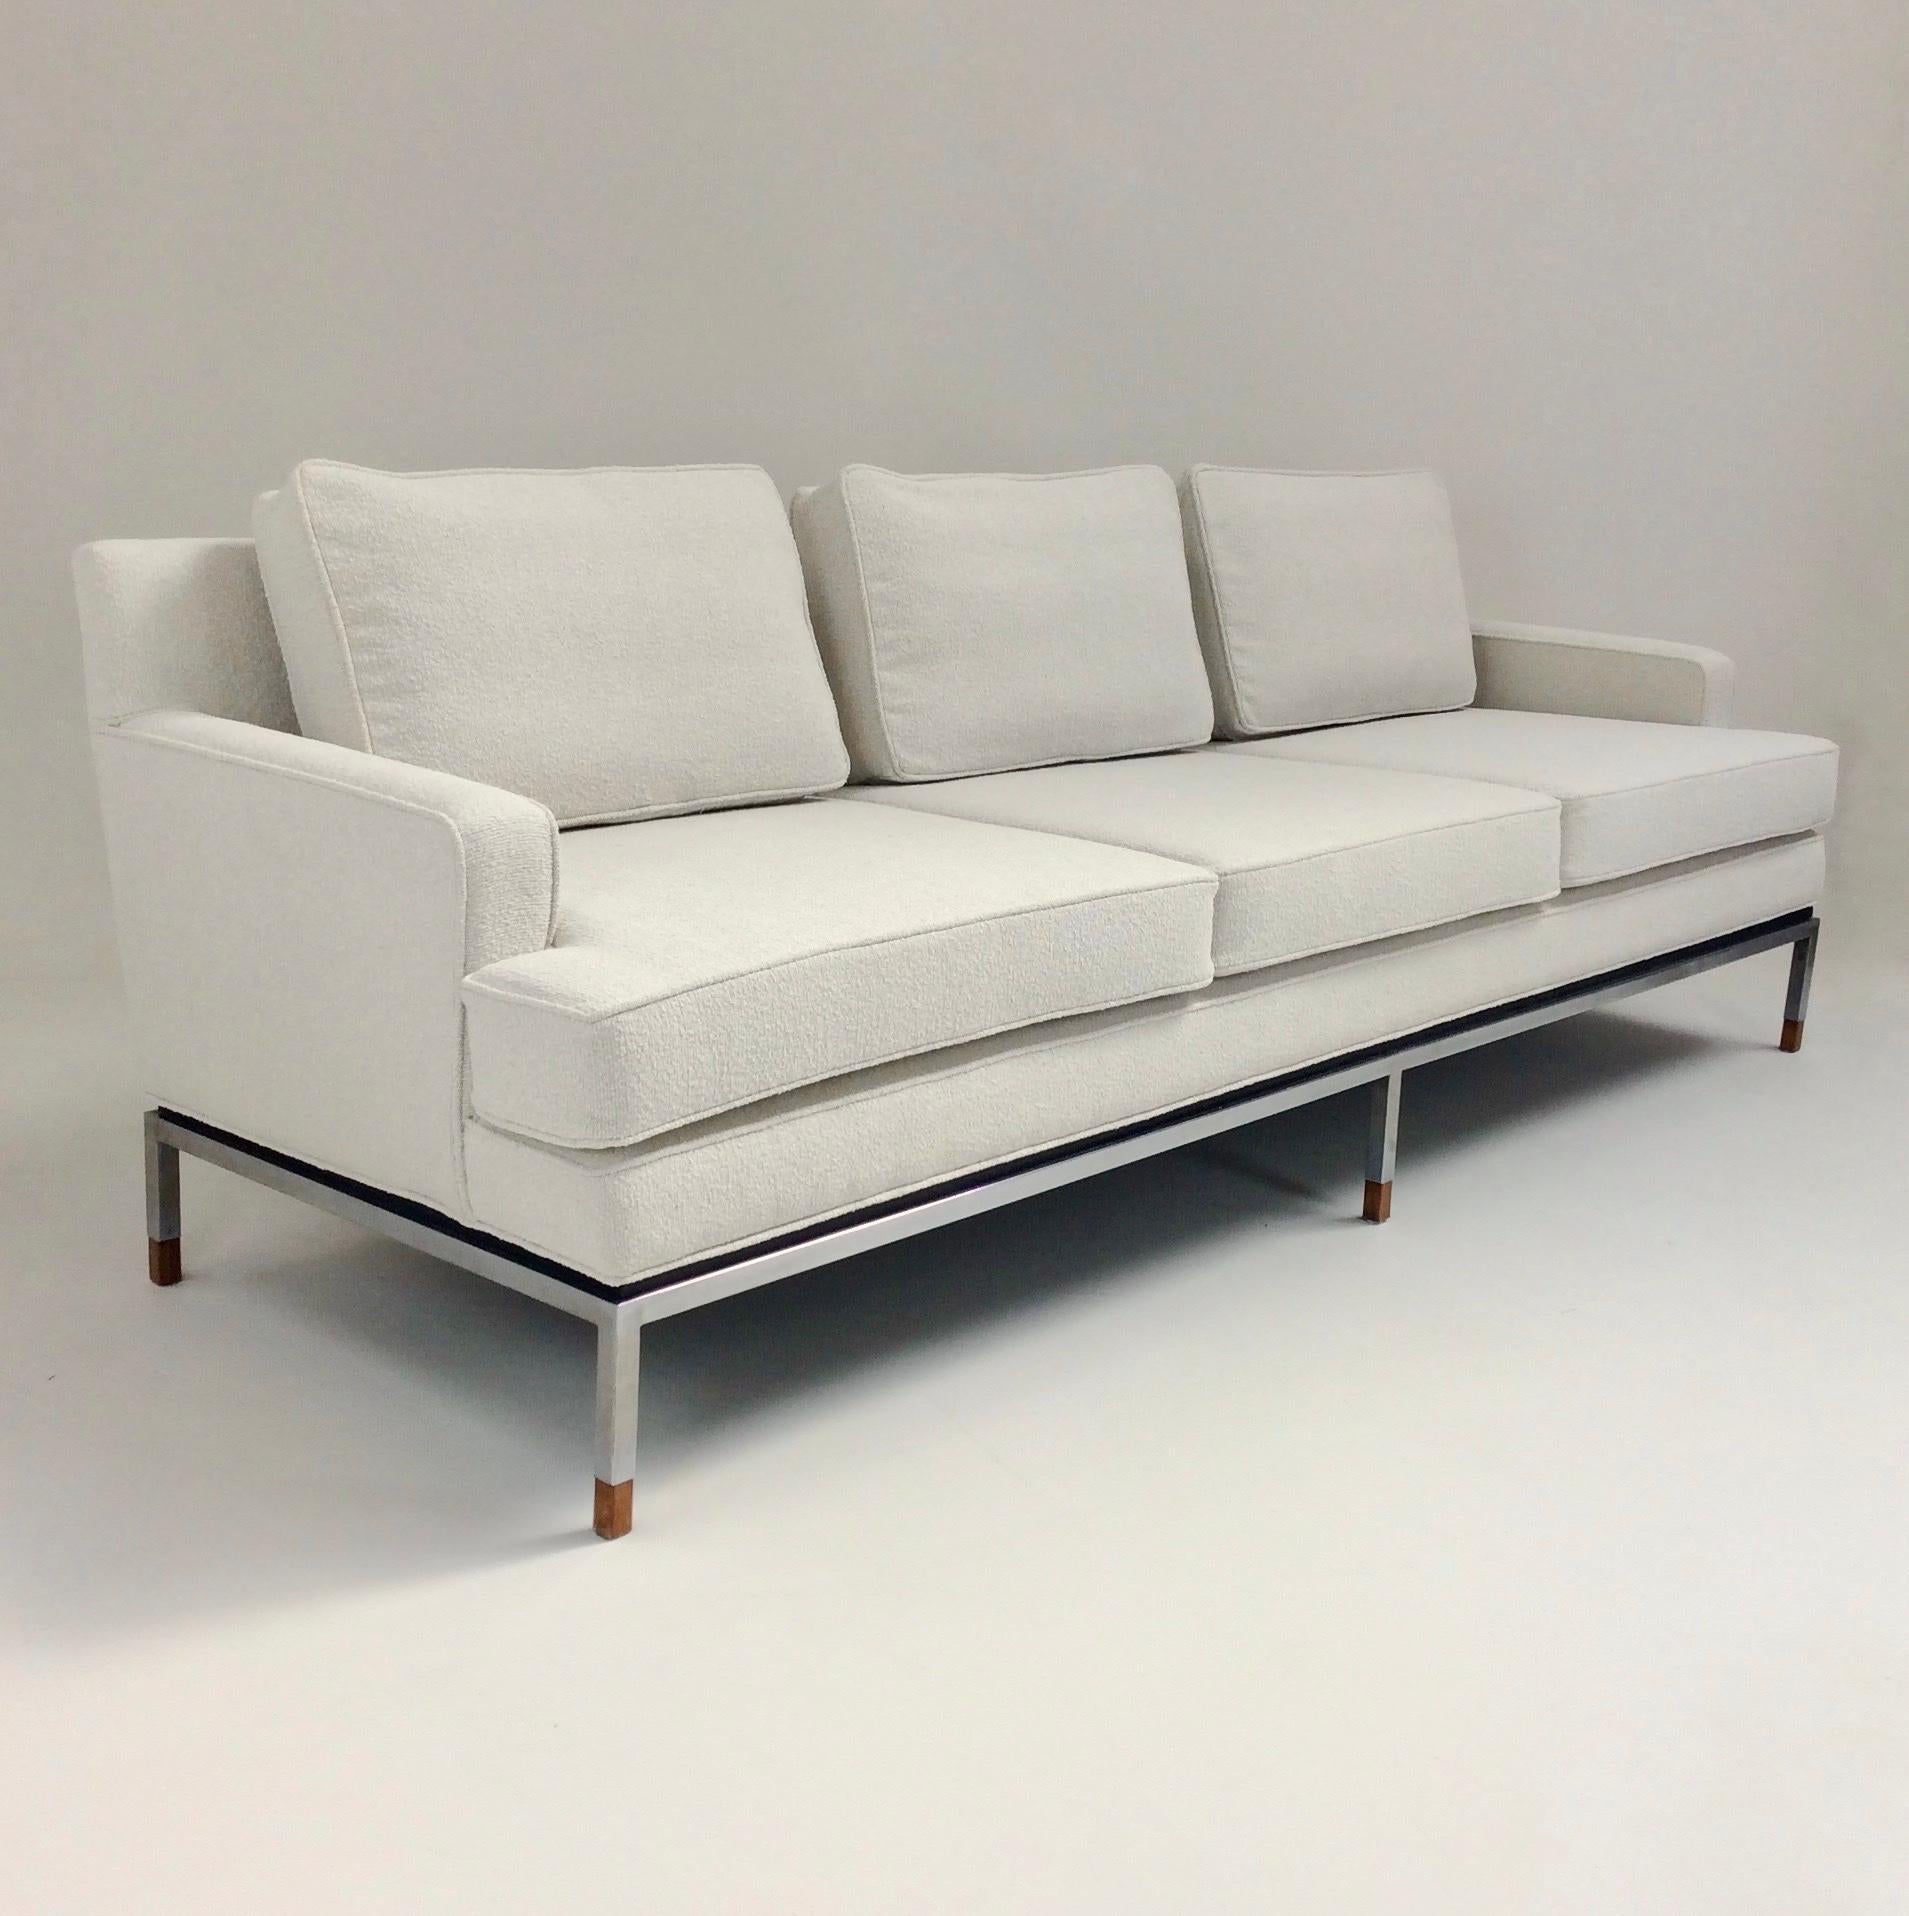 Large 3 seats sofa, Dunbar Edition, circa 1970, United States.
New upholstery, off white mix bouclé fabric, steel base and feet with wood details.
Dimensions: 232 cm W, 75 cm H, 85 cm D, 48 cm seat height.
All purchases are covered by our Buyer